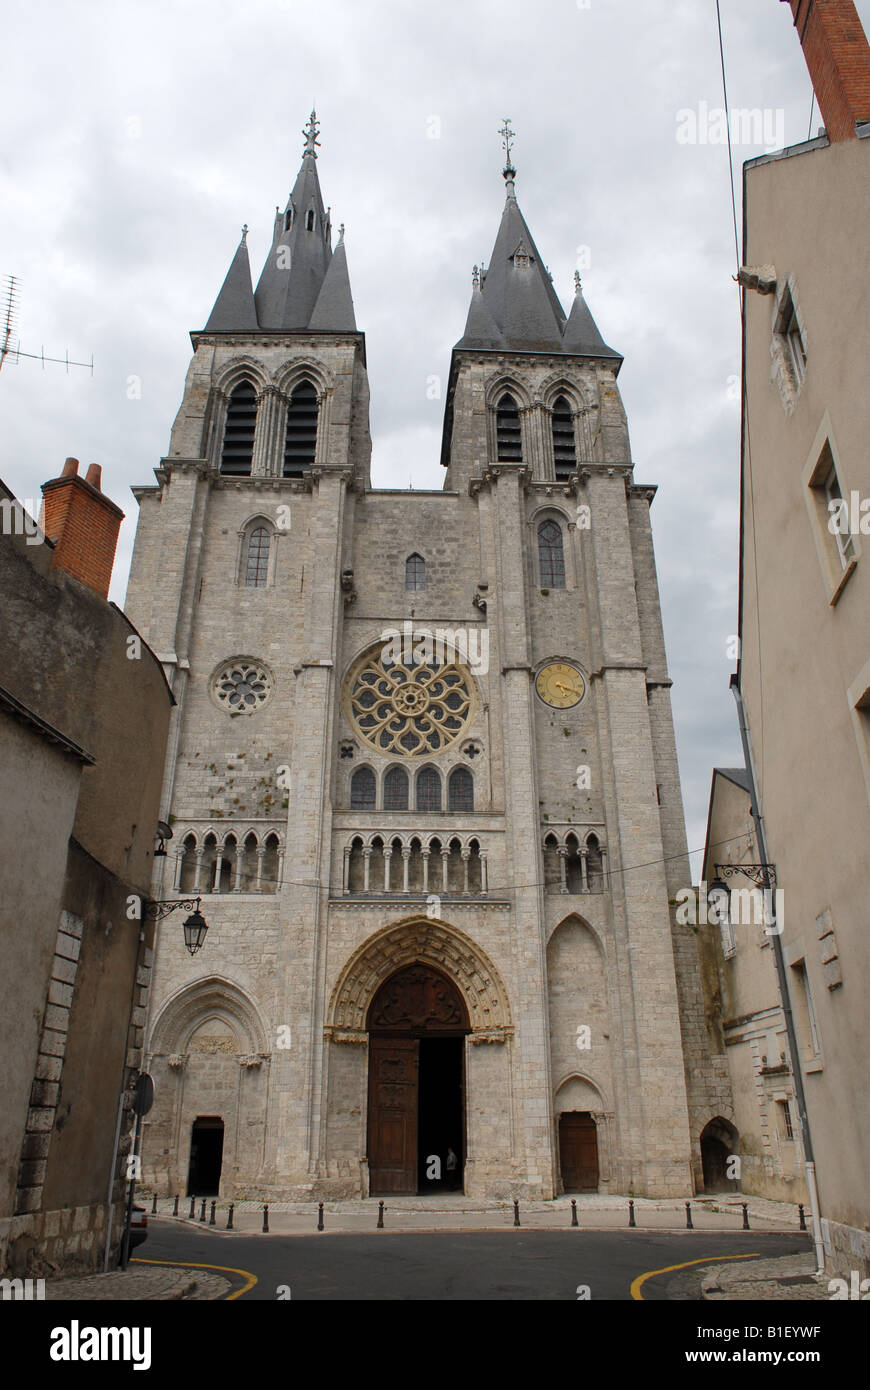 St Nicolas Church in the city of Blois in the Loire Valley region of France Stock Photo